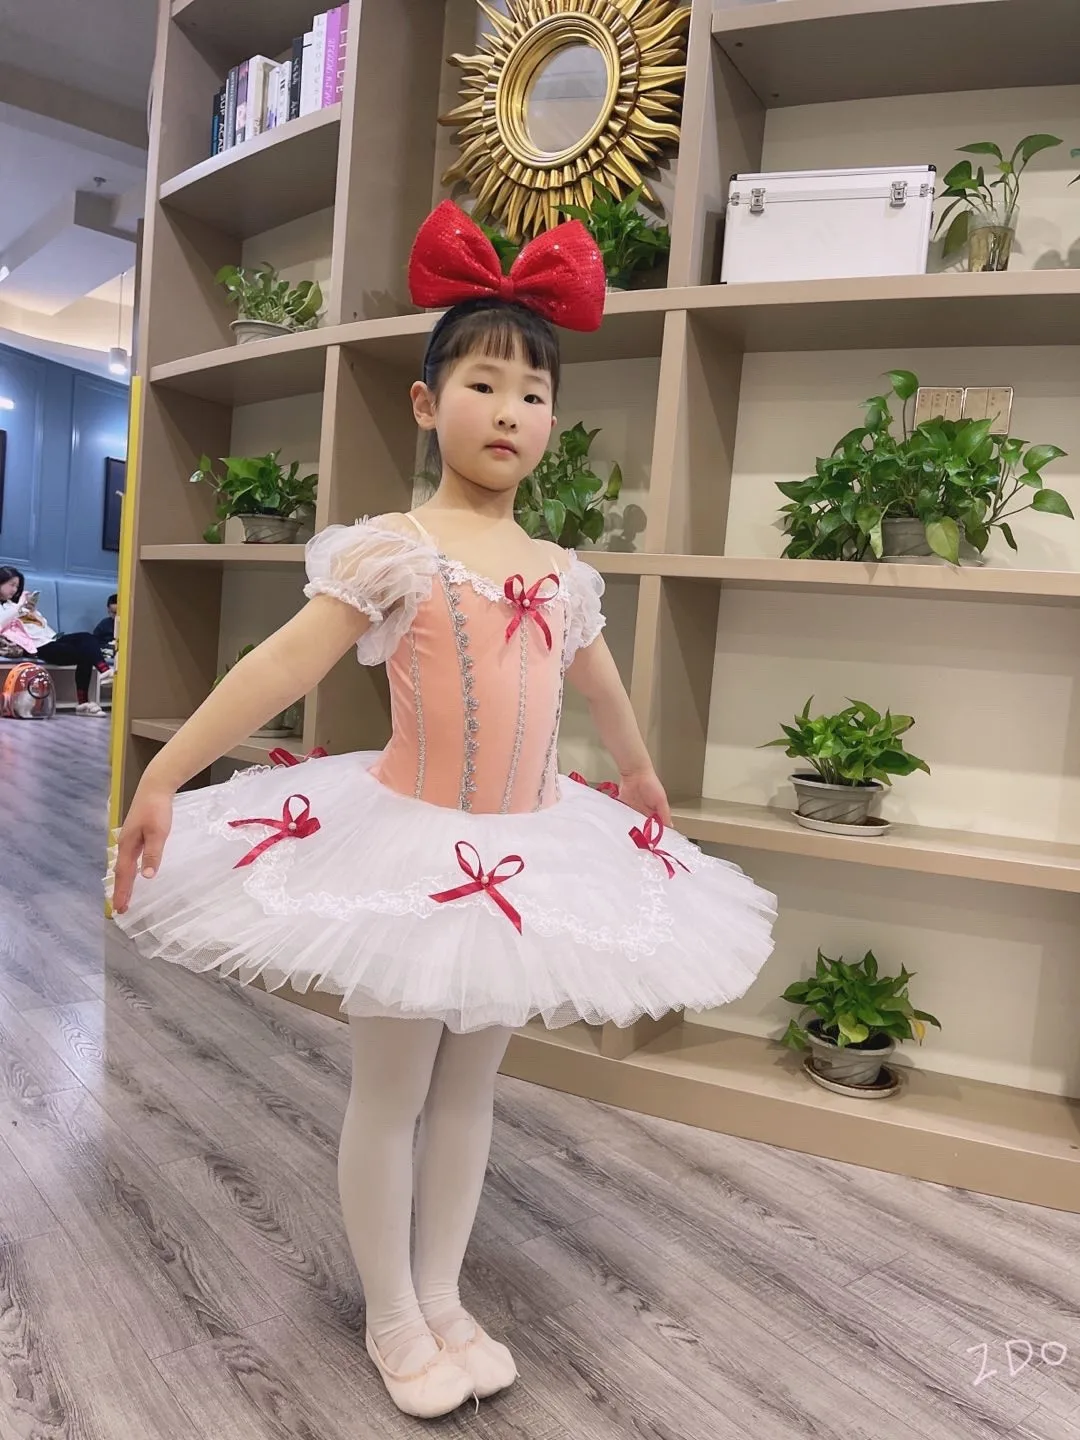 Puff Sleeves Classical Ballet Tutu Girls Ballet Dress Professional Pink Romantic Ballet Costume Dance Bodysuit Performance Cloth light green adult professional ballet tutu classical ballet tutus white pancake performance competition ballet stage costume